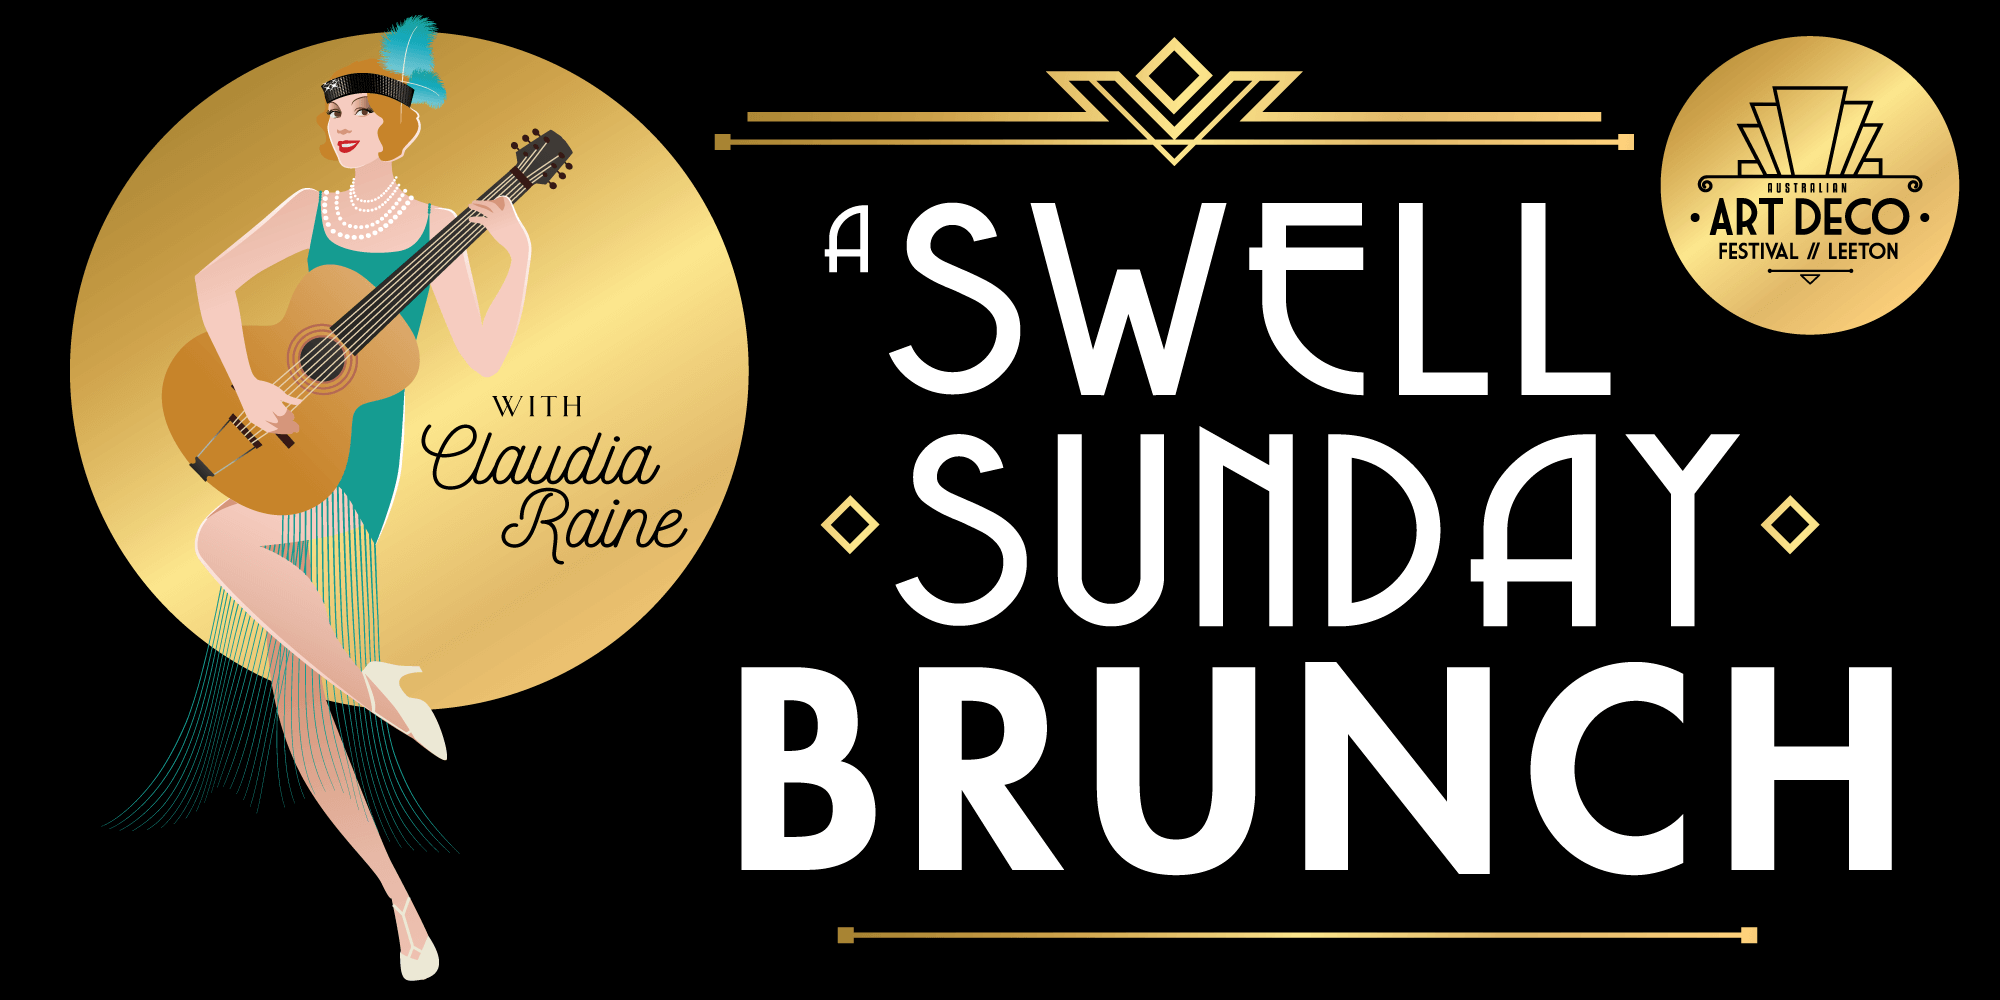 art deco festival event swell sunday brunch.png